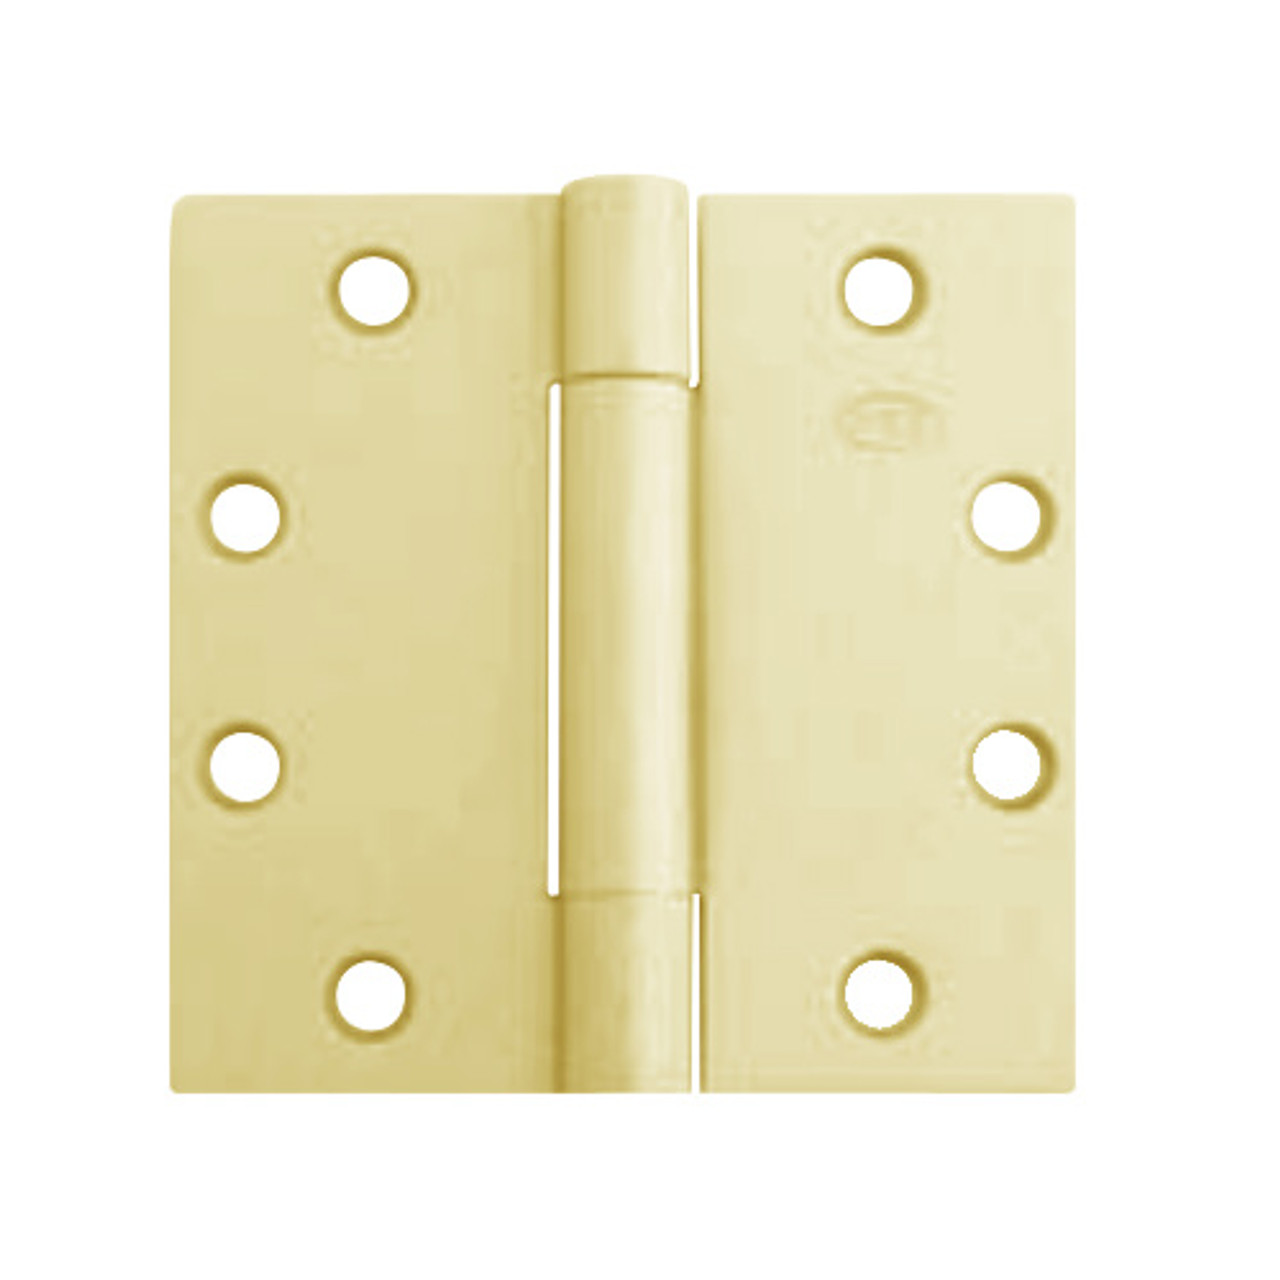 3CB1-4x4-633 IVES 3 Knuckle Concealed Bearing Full Mortise Hinge in Satin Brass Plated